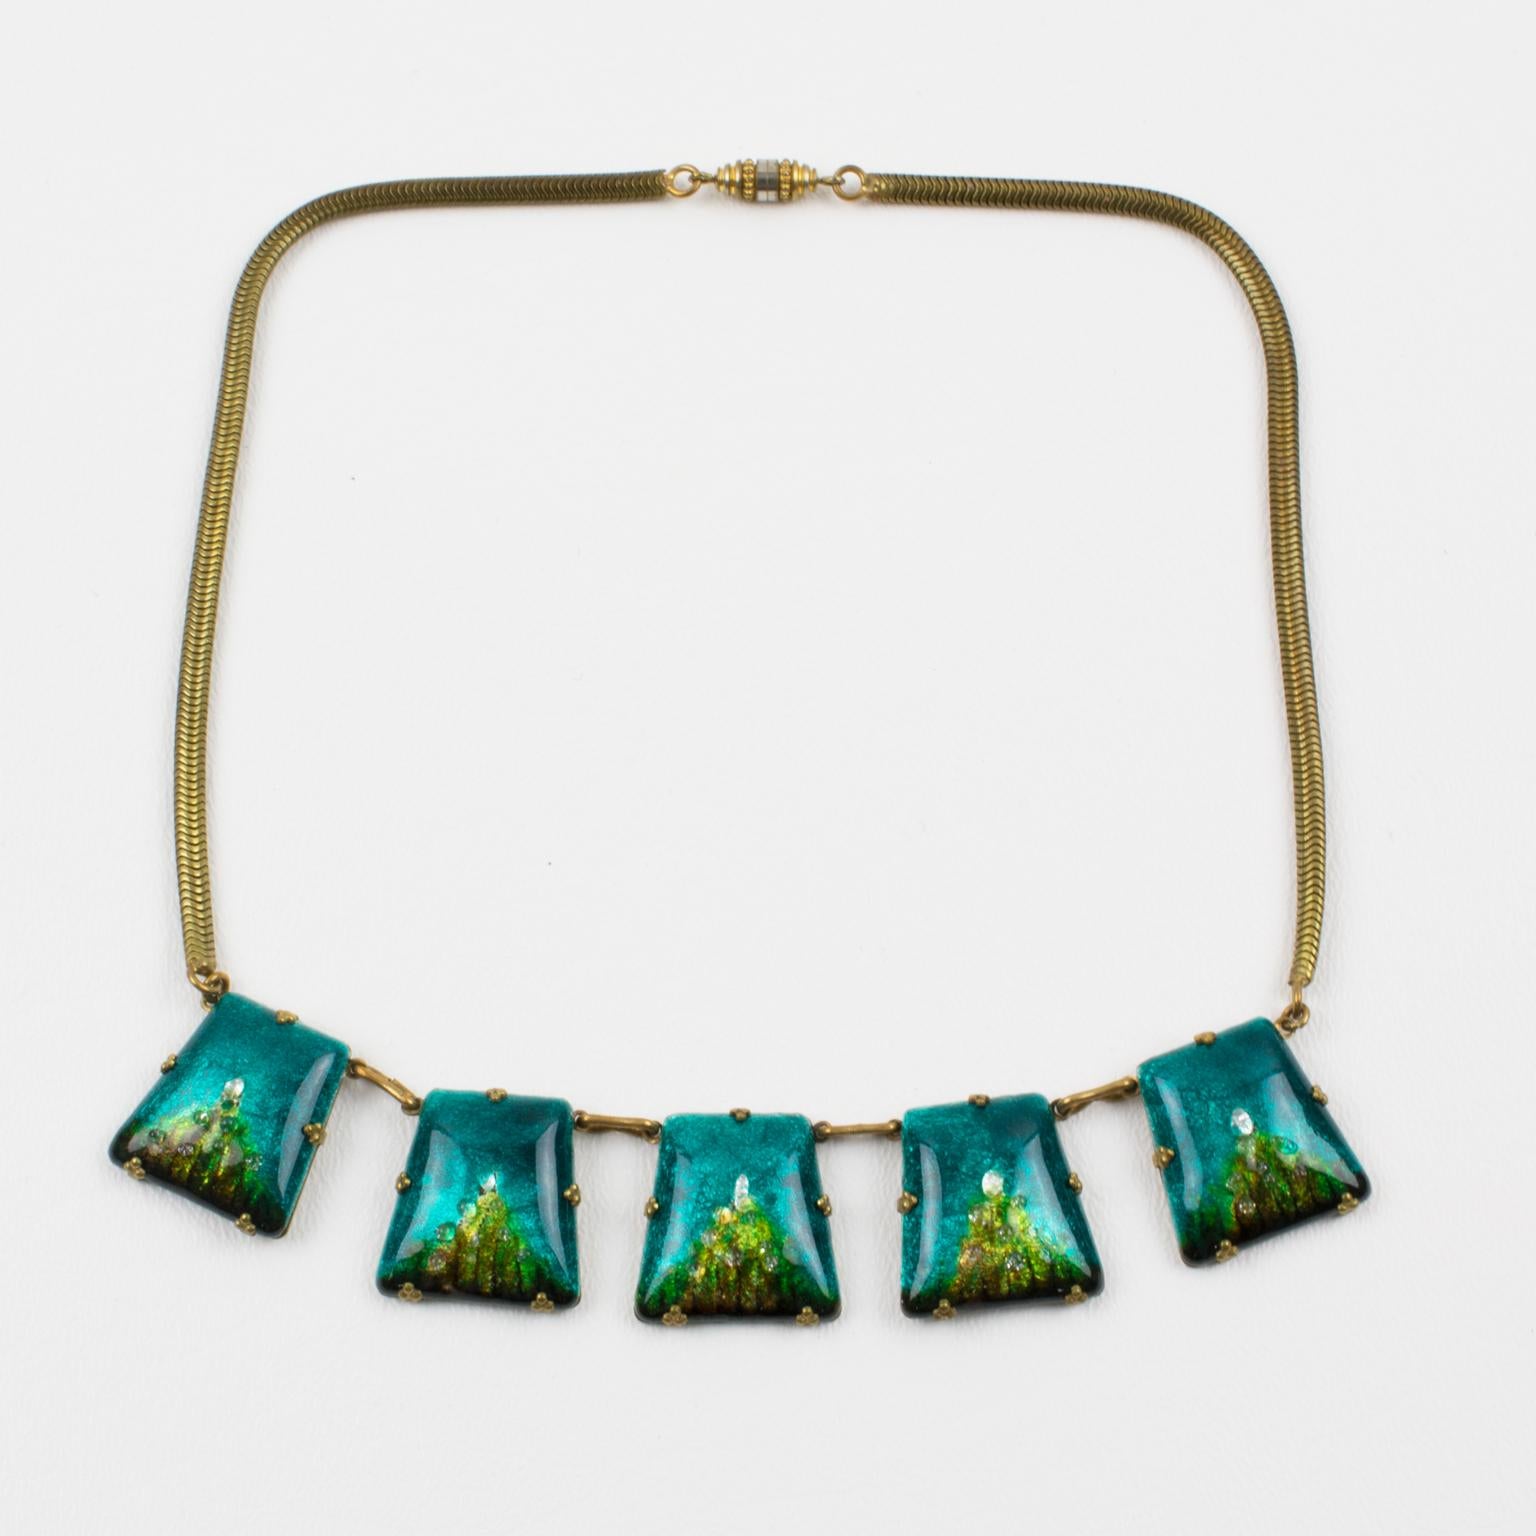 A charming enamel and pate de verre link choker necklace made in Limoges, France. Enameled domed trapeze copper elements are hinged together with brass framing to a turbogas or serpentine chain. This popular 1950s and 1960s technique named 